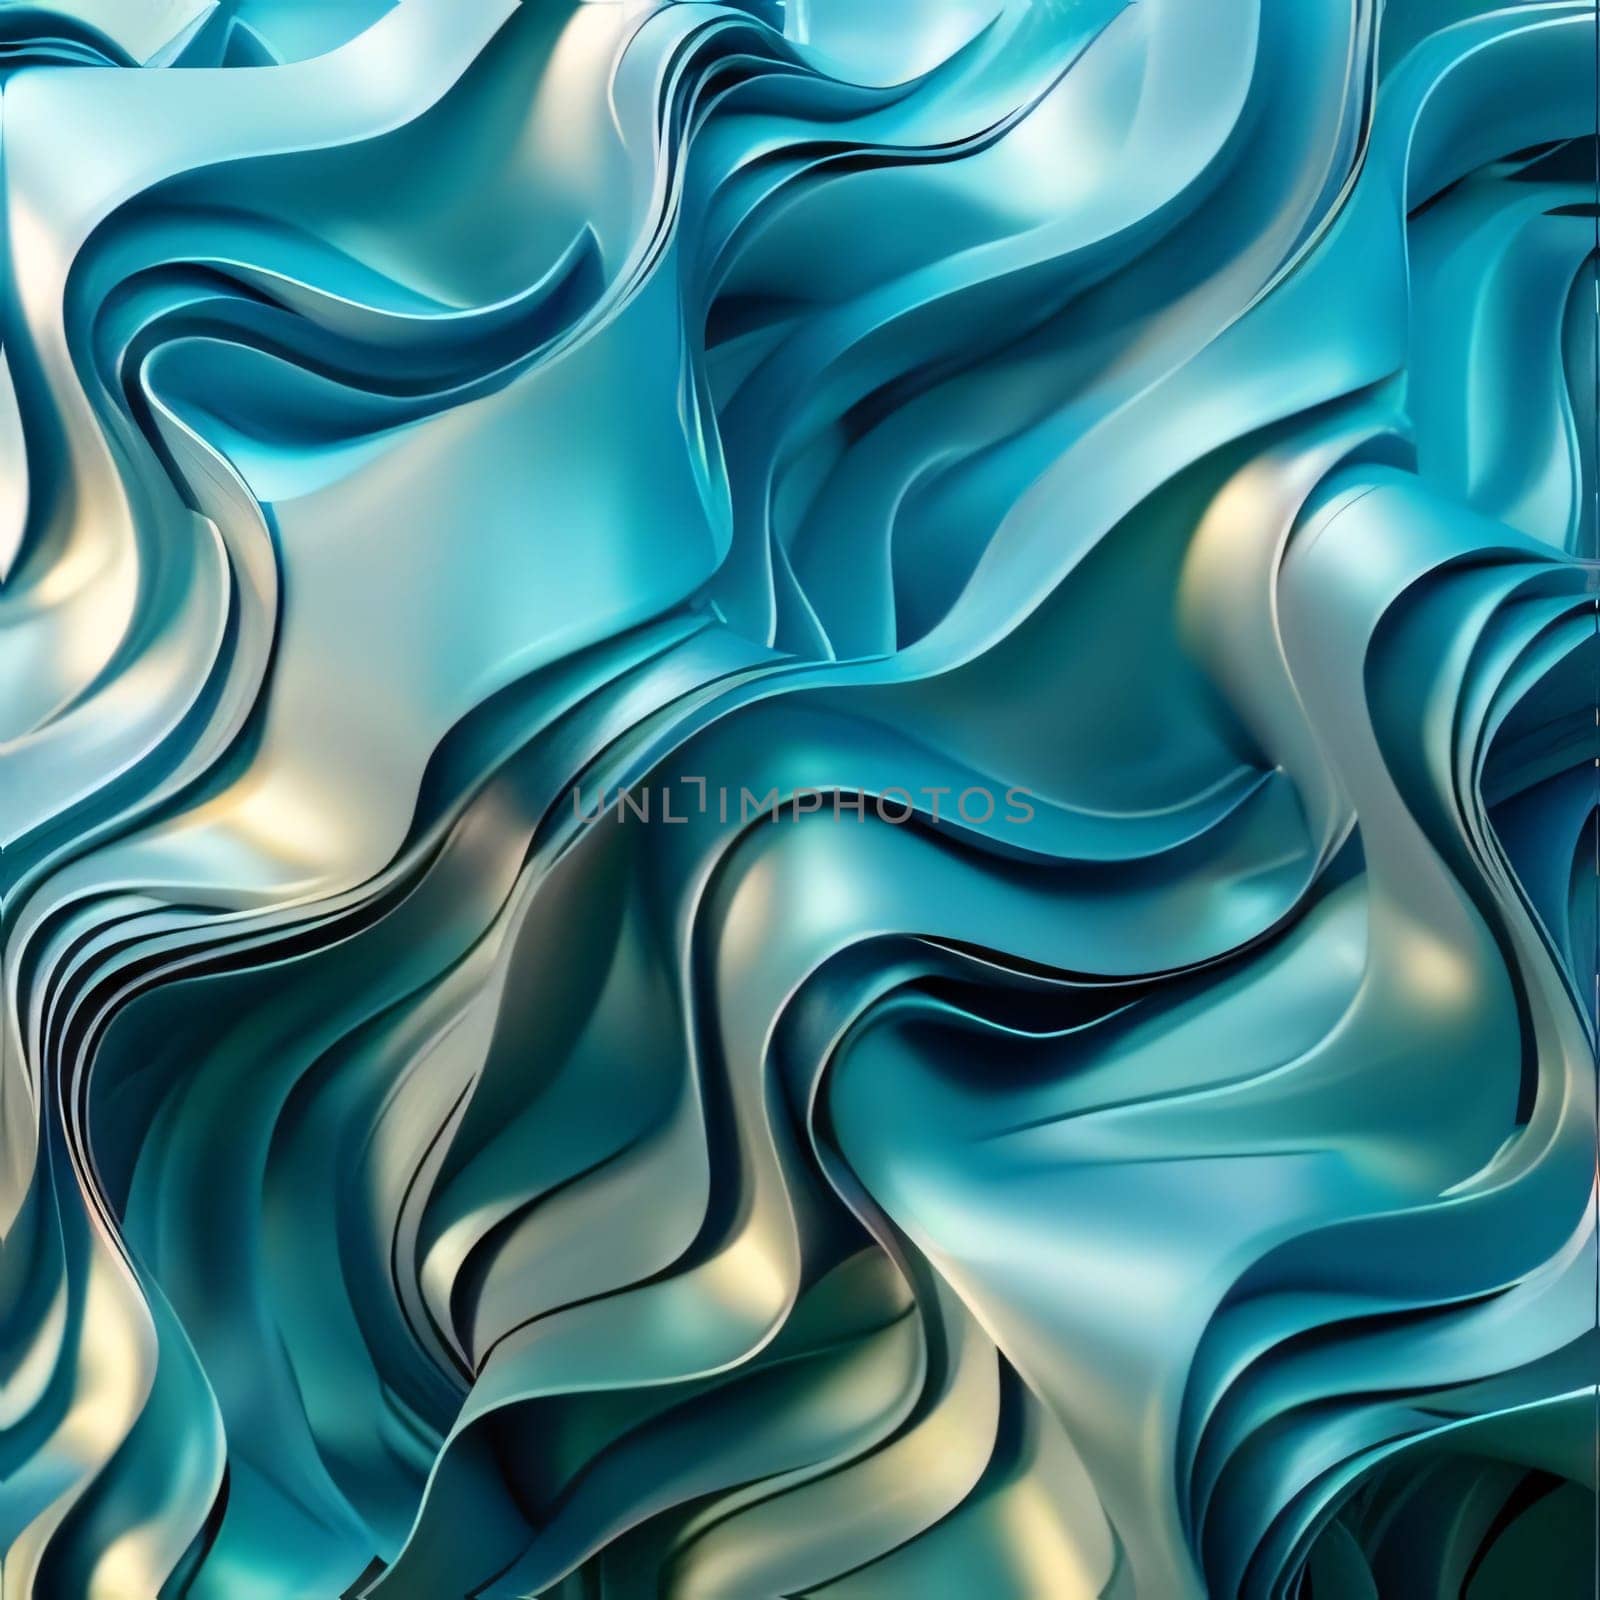 Abstract background design: Abstract wavy background. 3d rendering, 3d illustration.